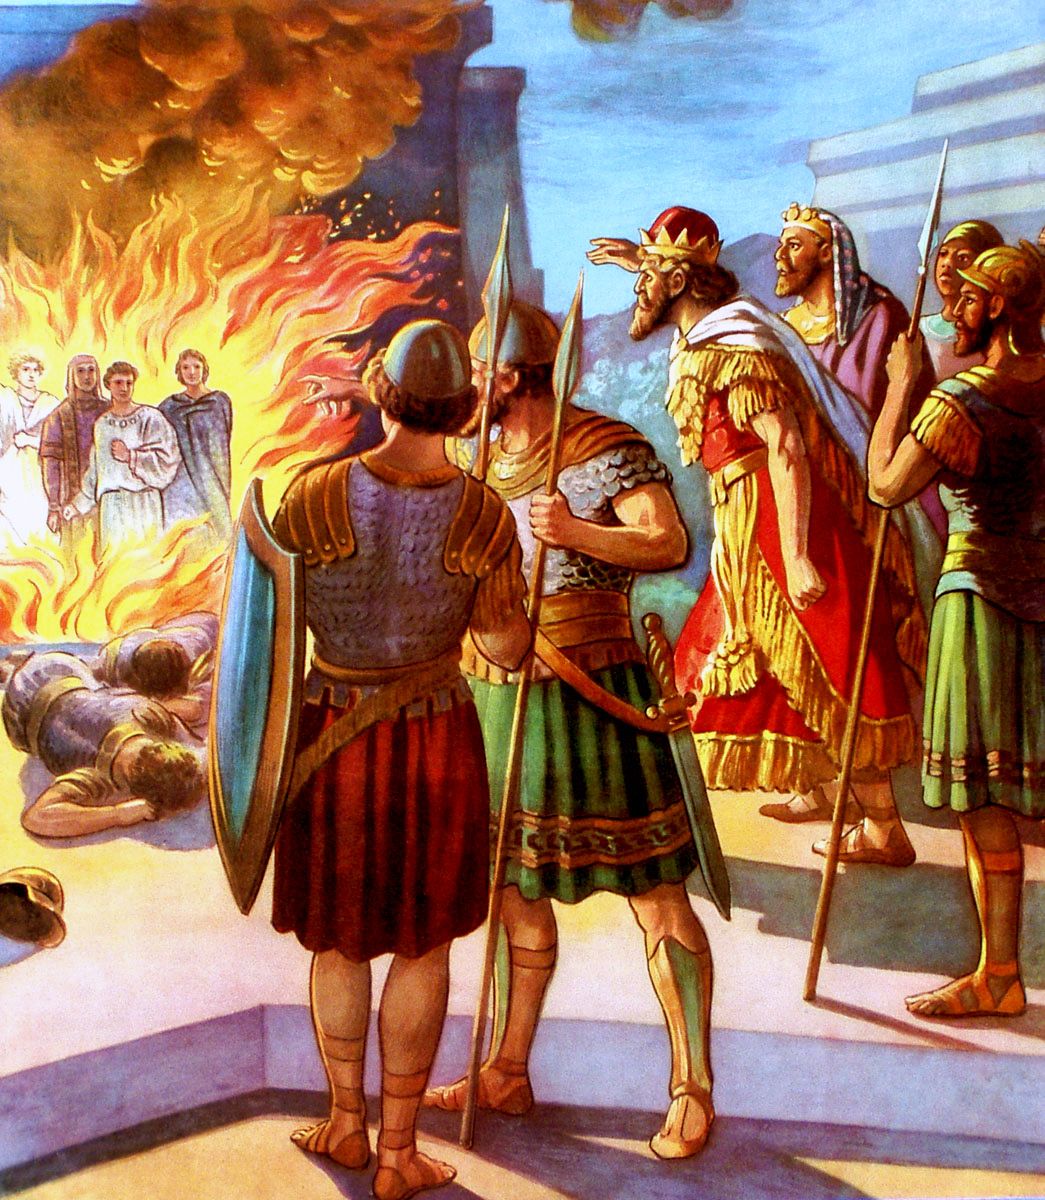 Shadrach, Meshach, and Abed-nego in the Furnace